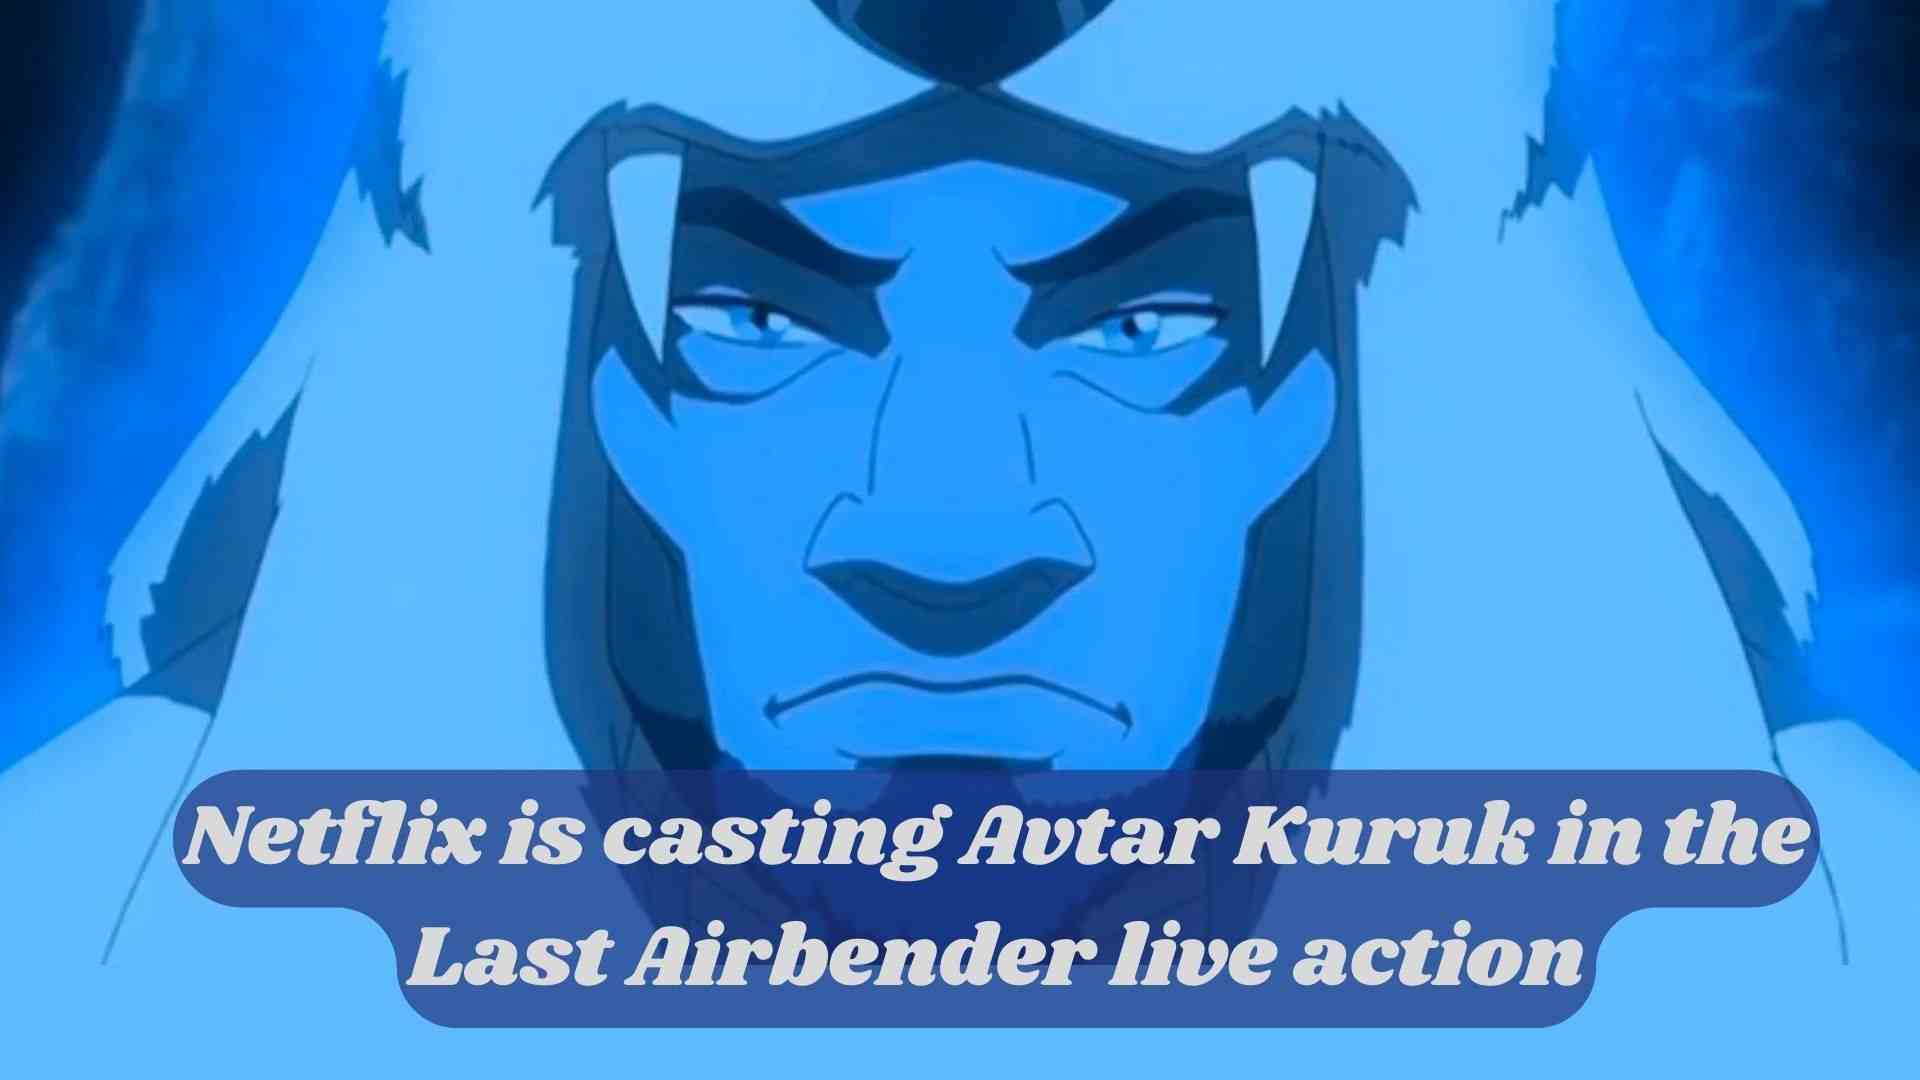 Netflix is casting Avtar Kuruk in the Last Airbender live action wallpaper and images